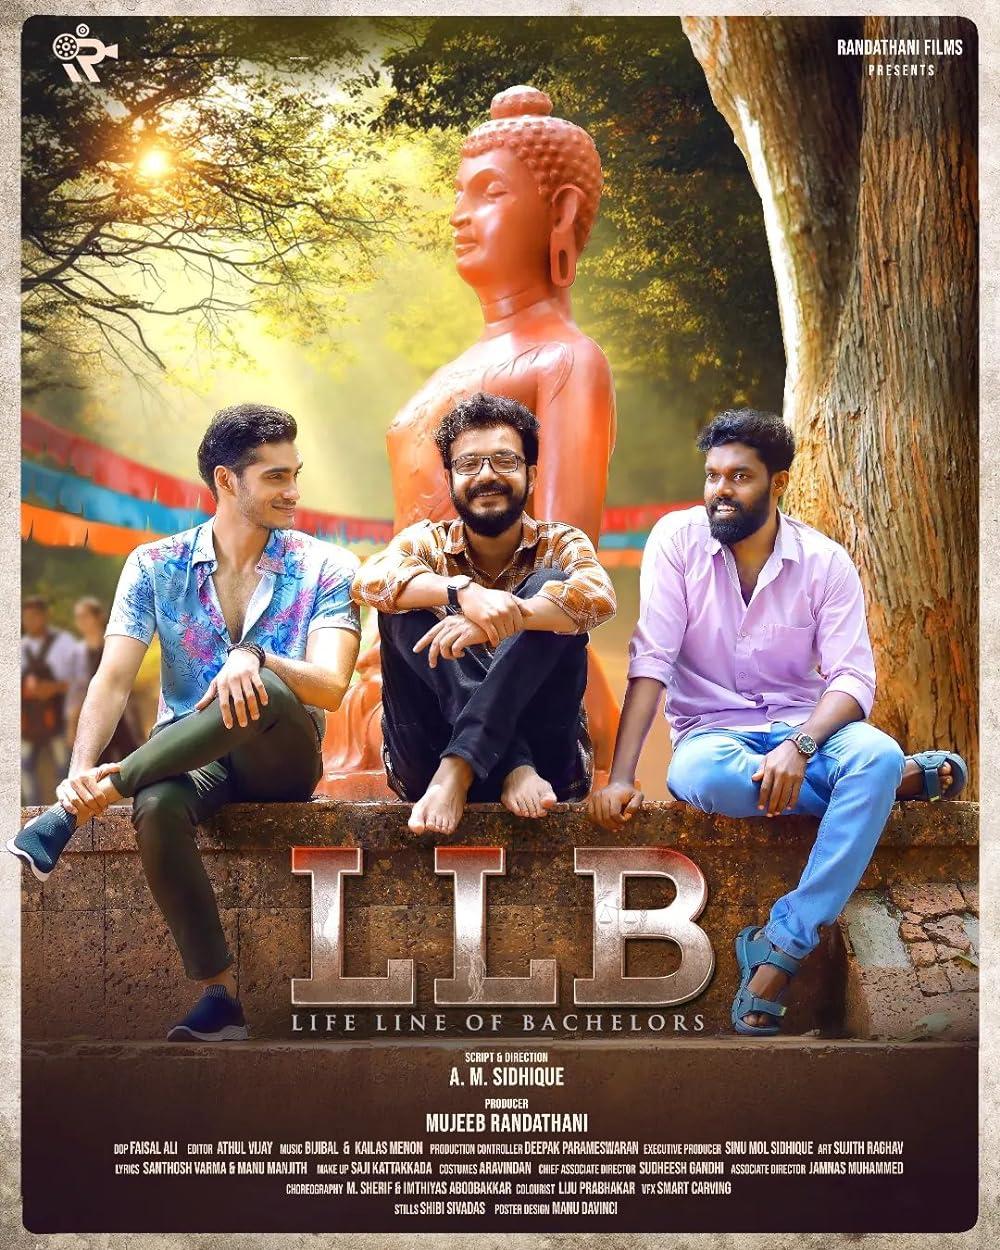 LLB (Life Line of Bachelors) - synopsis and review